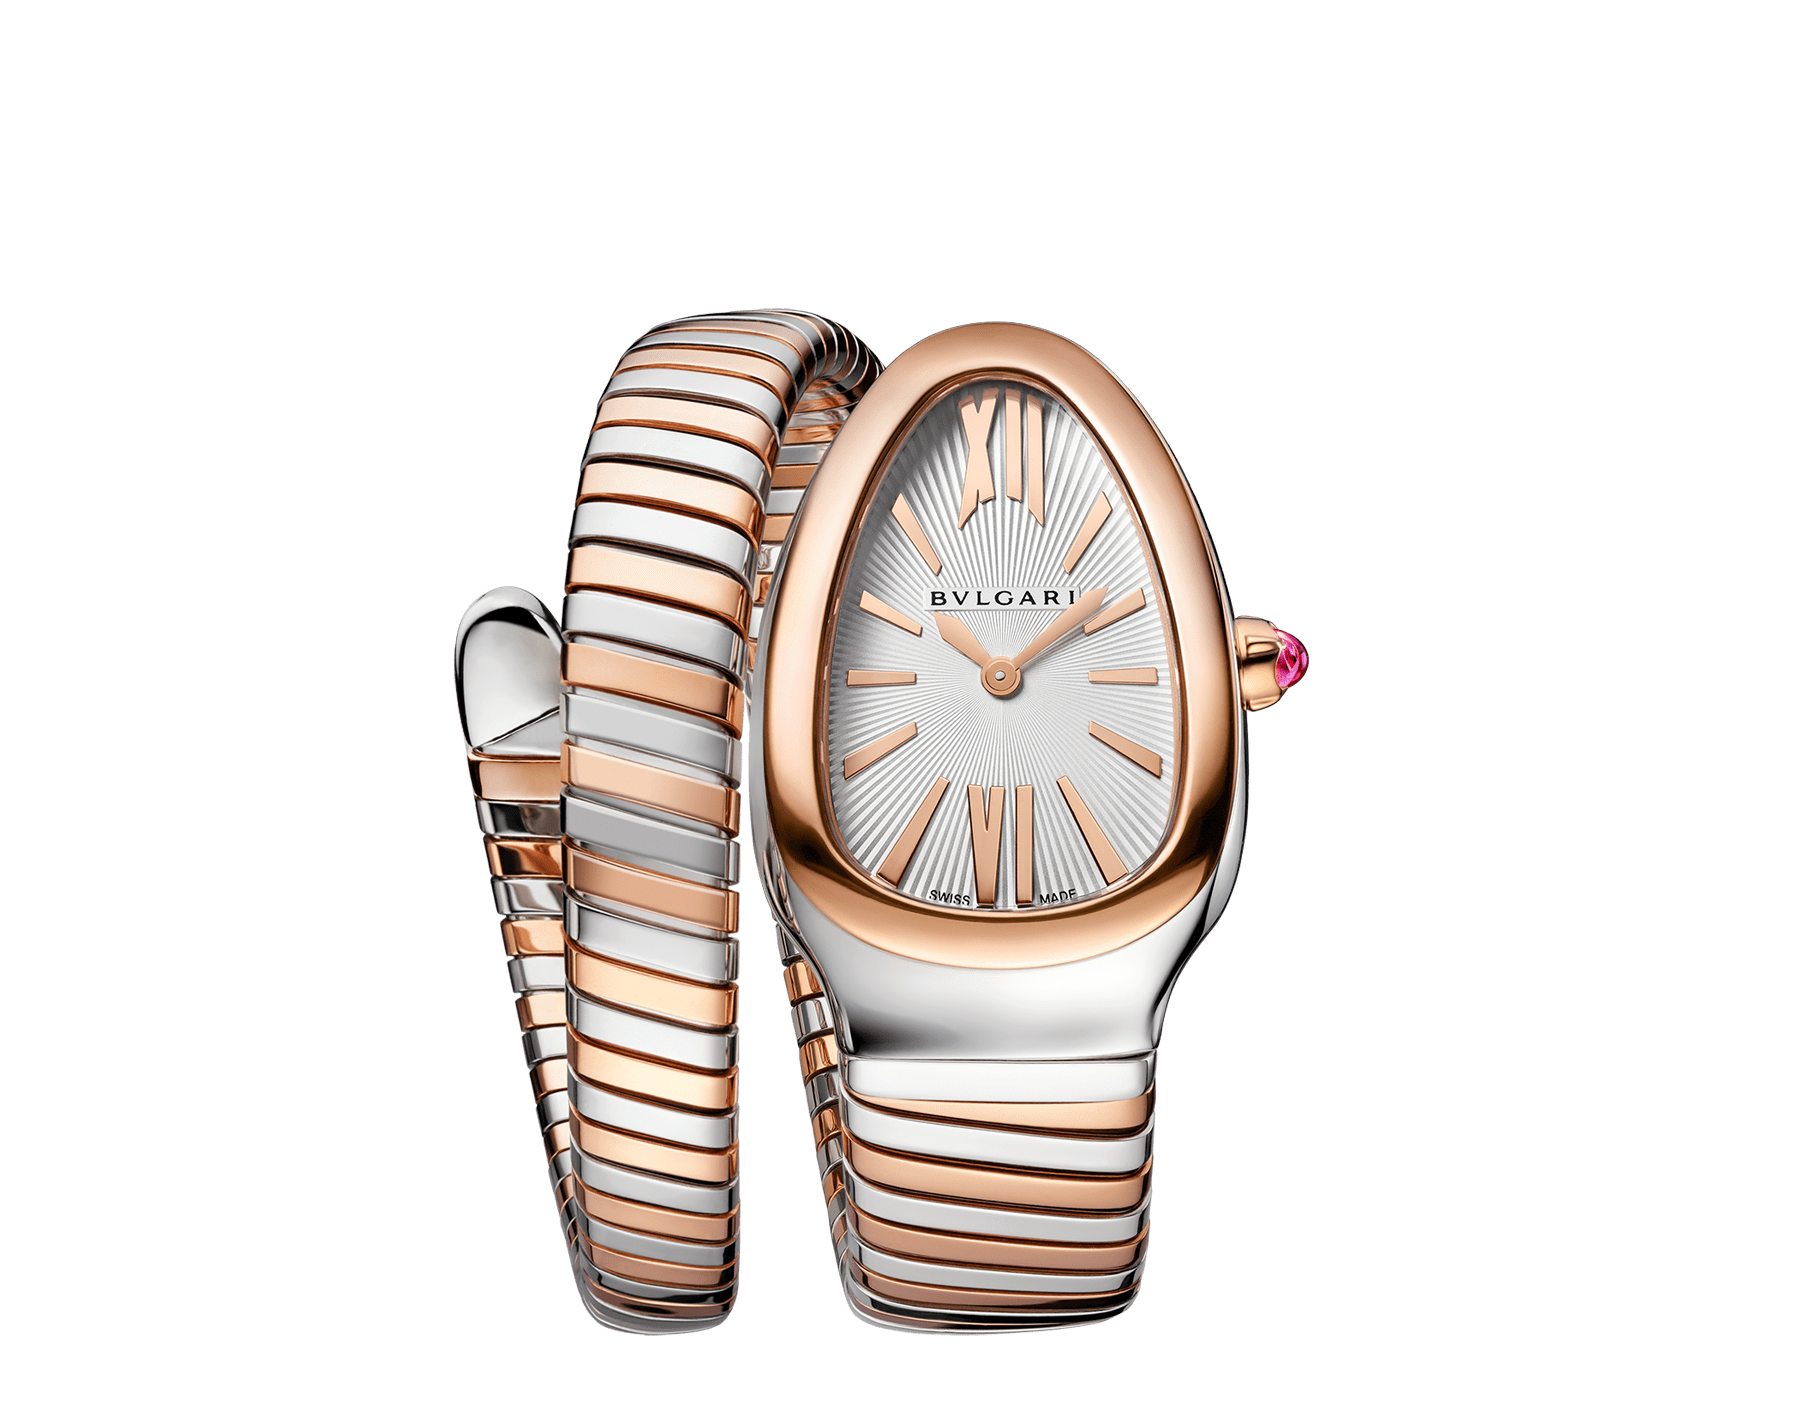 Serpenti Tubogas single-spiral watch in 18 kt rose gold and stainless steel with white opaline dial with guilloché soleil treatmen. Water-resistant up to 30 metres SERPENTI-TUBOGAS-1T-whiteDial image 1